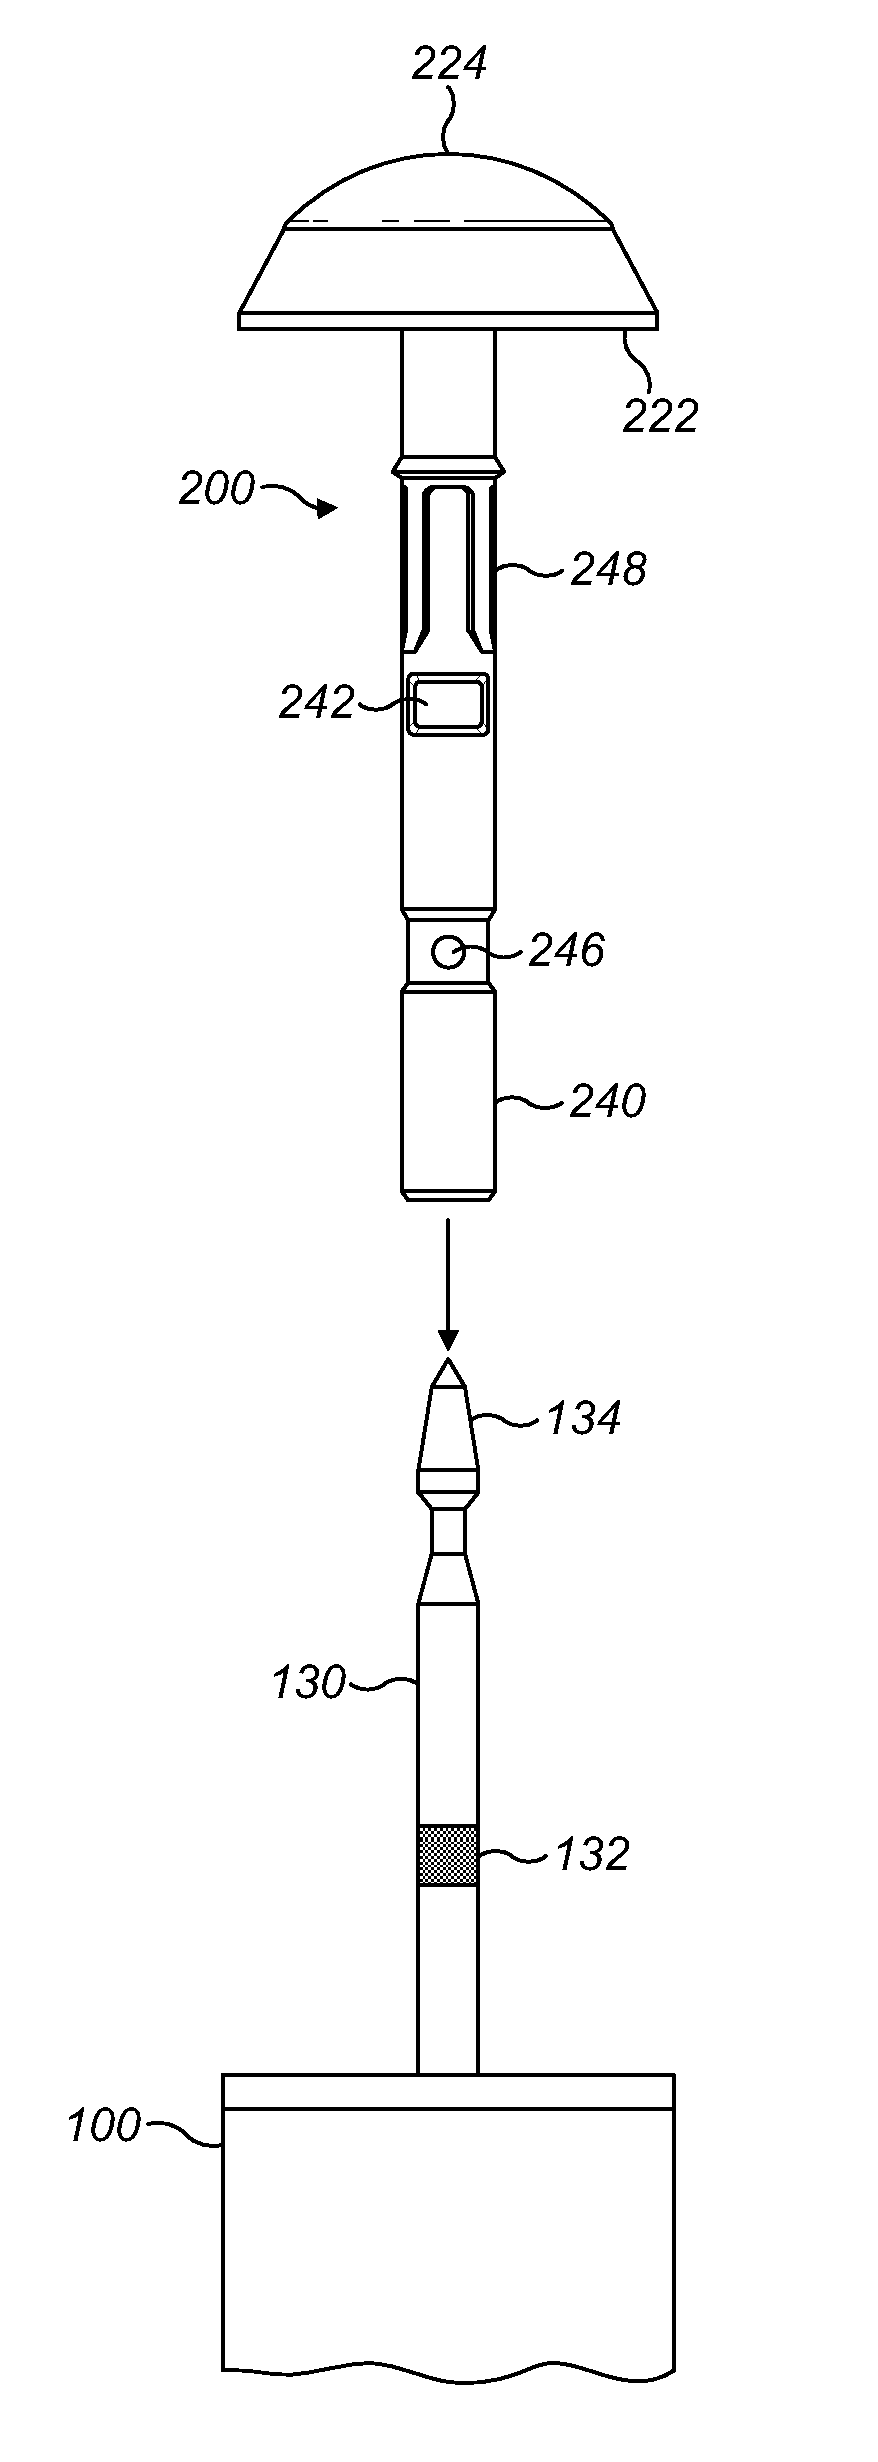 Method and apparatus for forming stoma trephines and anastomoses